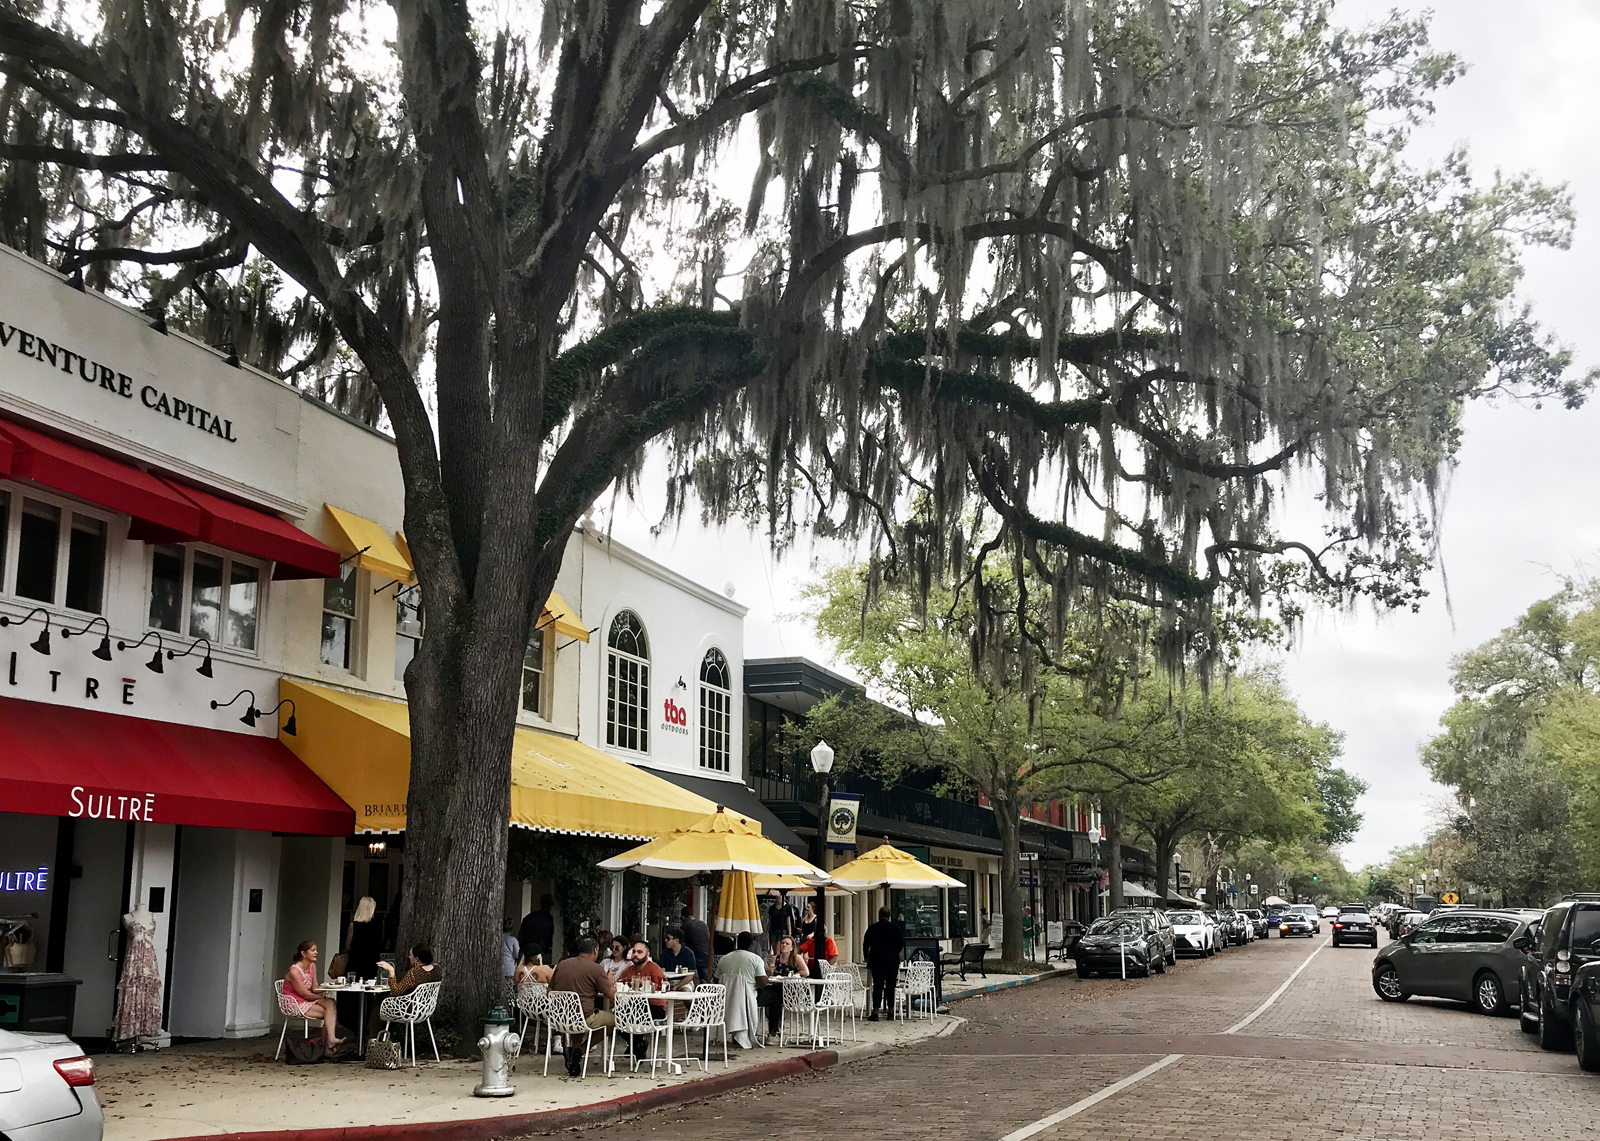 Things to do in Winter Park FL: Strolling Park Avenue. (Photo: Bonnie Gross)